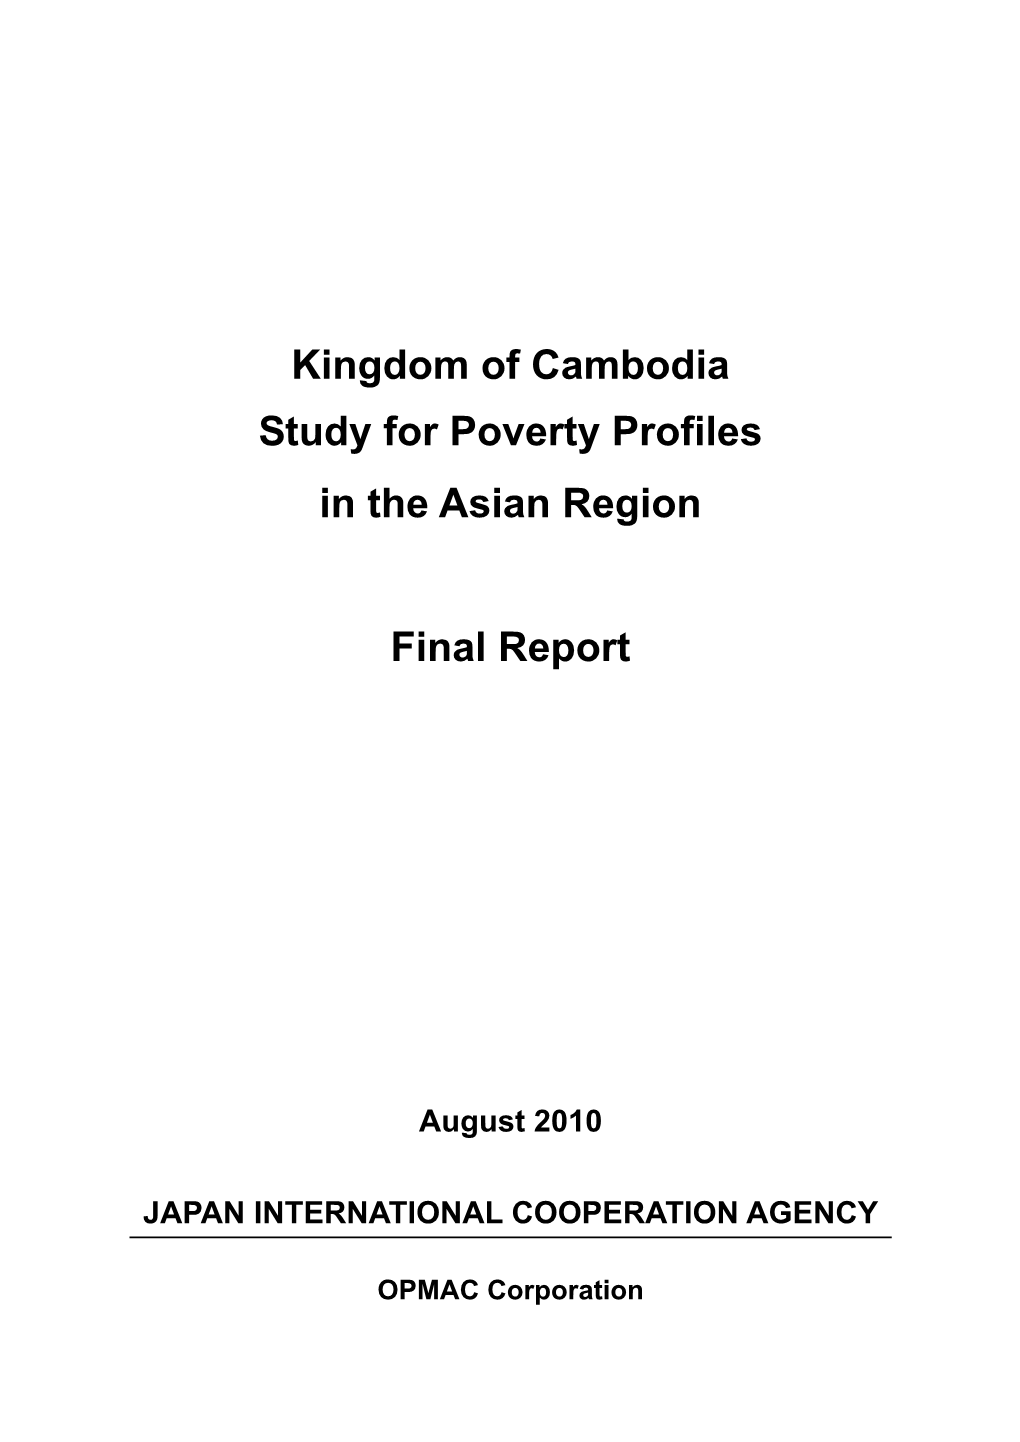 Kingdom of Cambodia Study for Poverty Profiles in the Asian Region Final Report